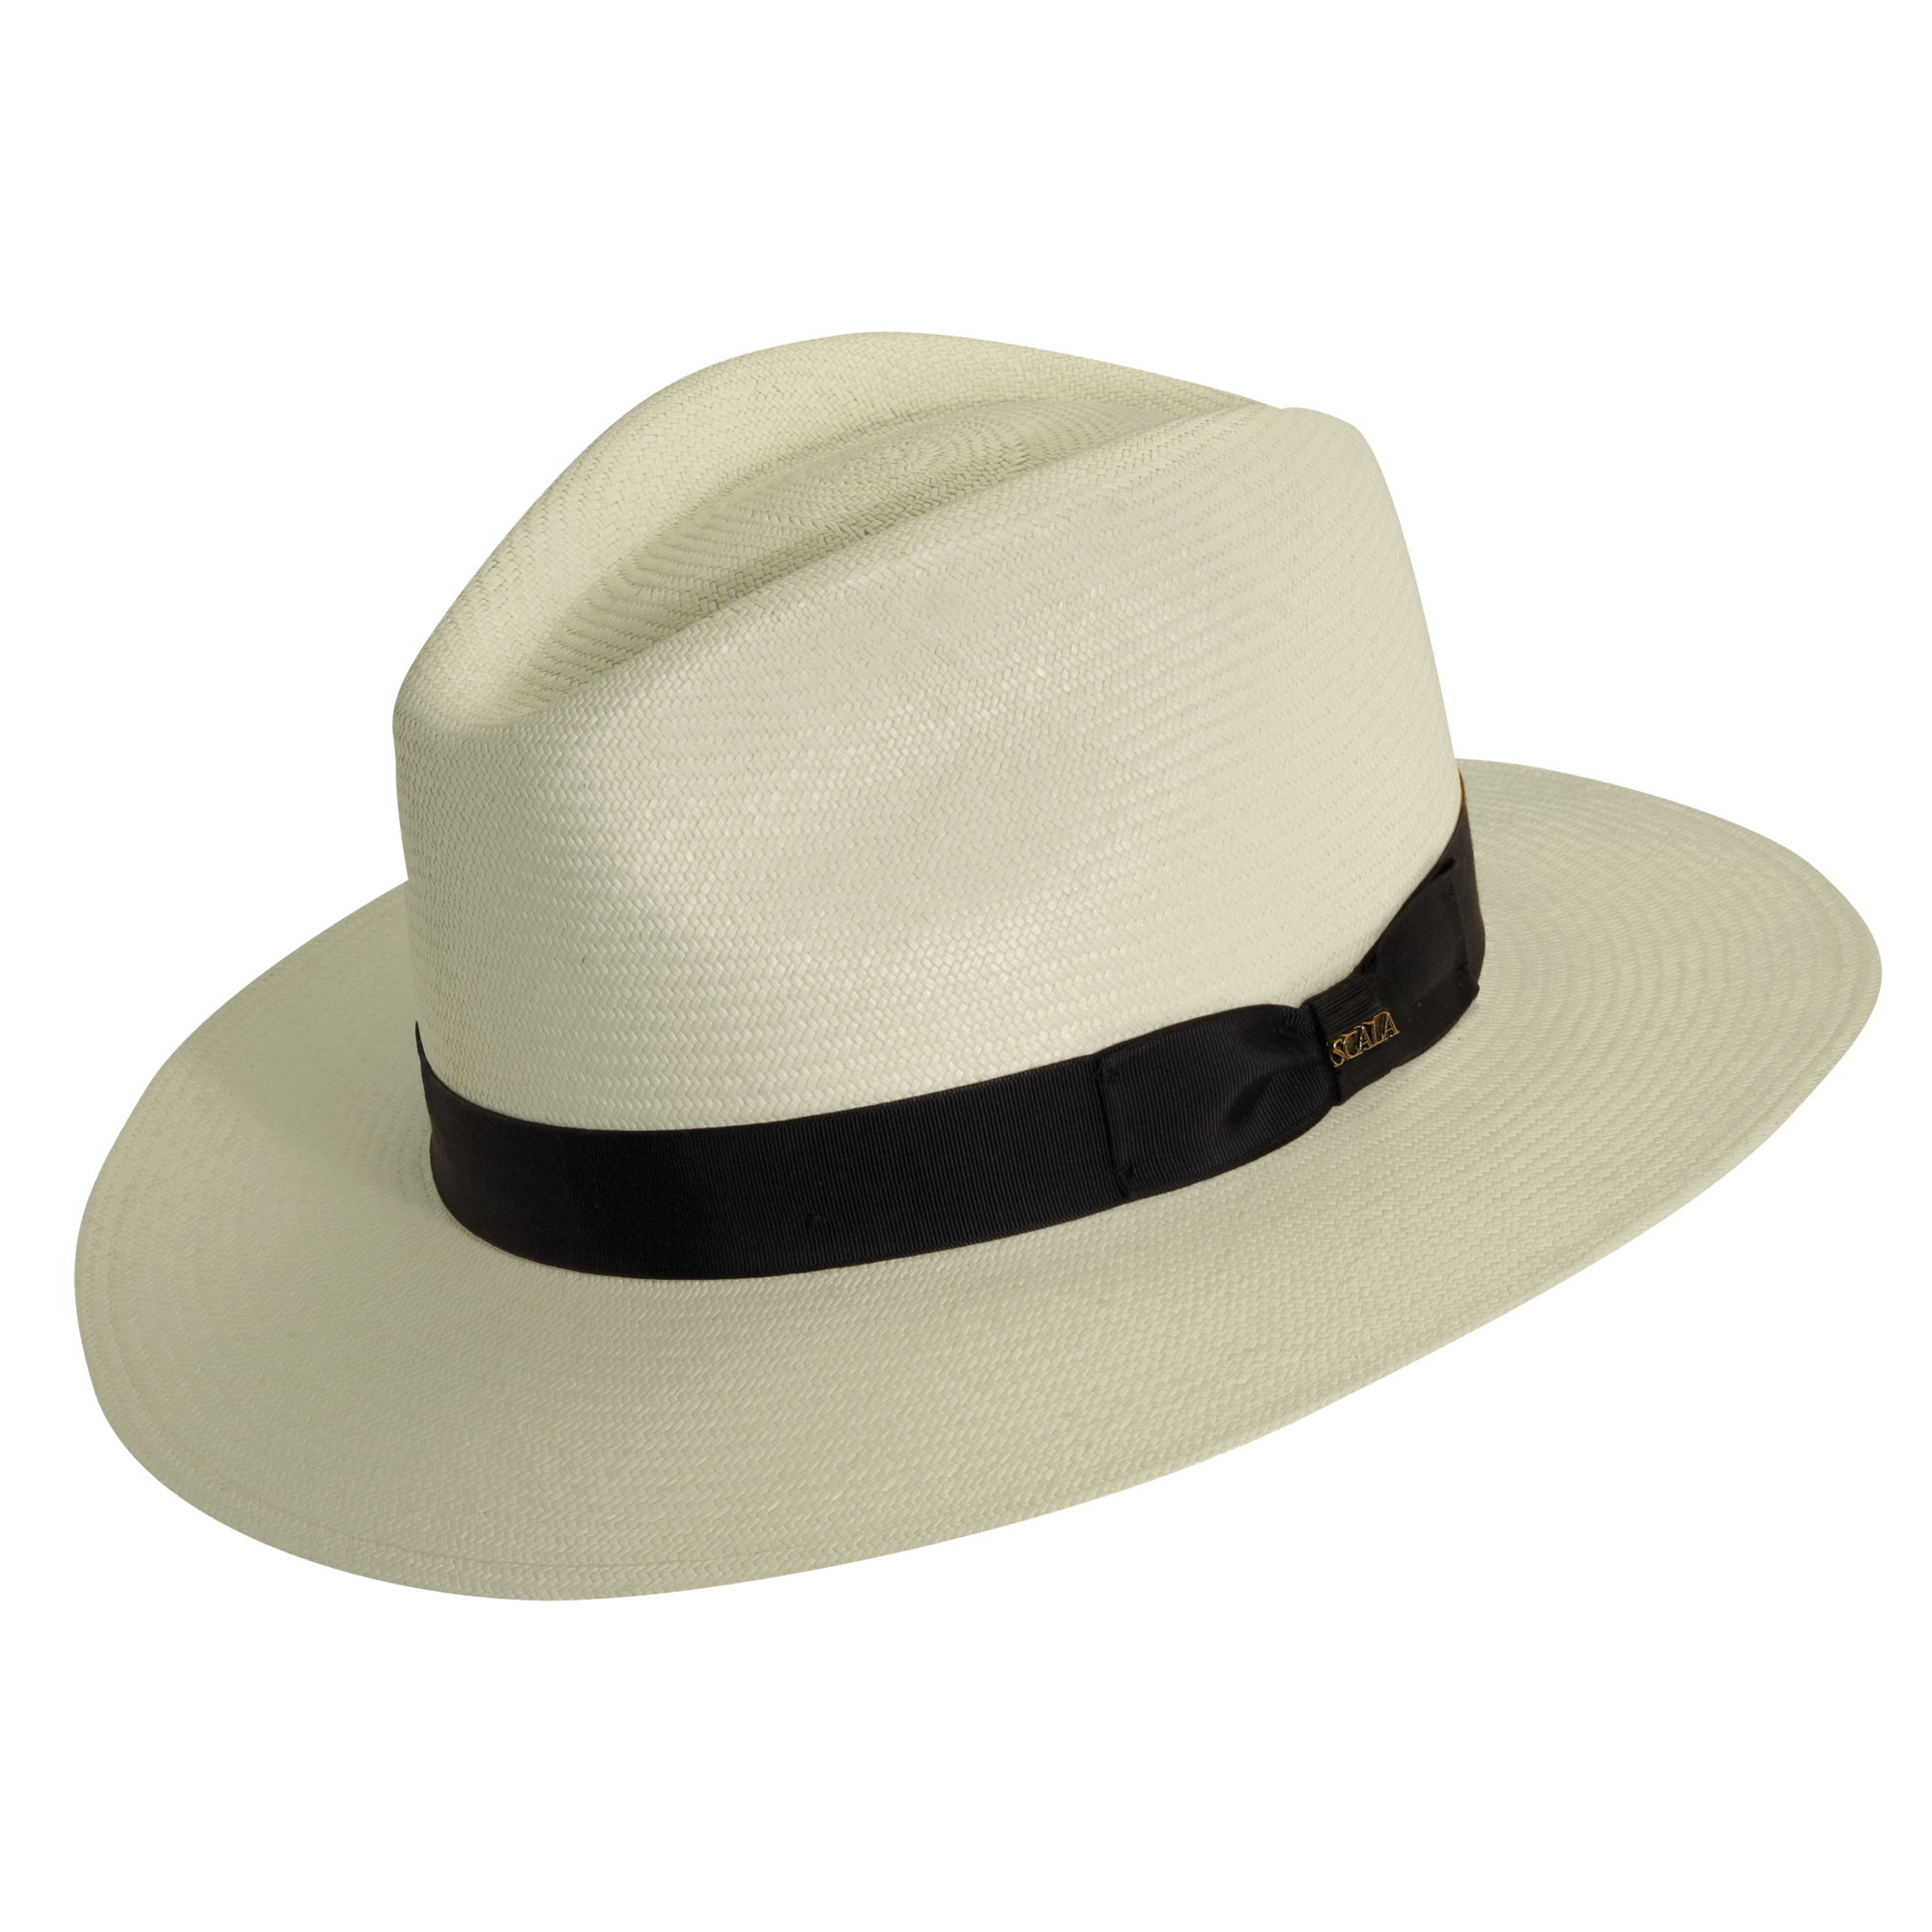 List 103+ Pictures Which Country Does The Panama Hat Originate From ...